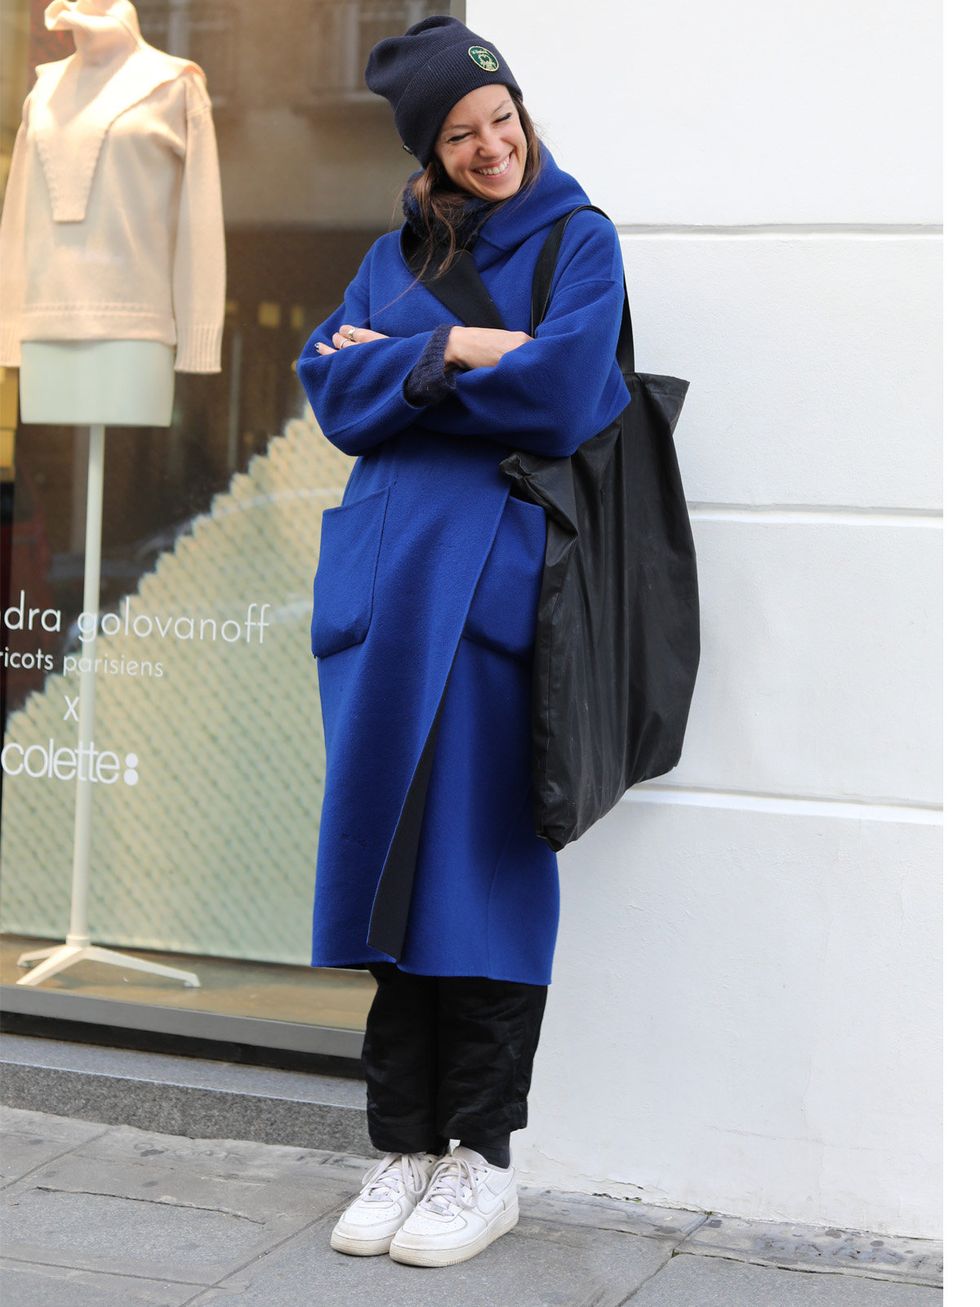 Blue, Clothing, Outerwear, Street fashion, Fashion, Electric blue, Robe, Costume, Overcoat, Smile, 